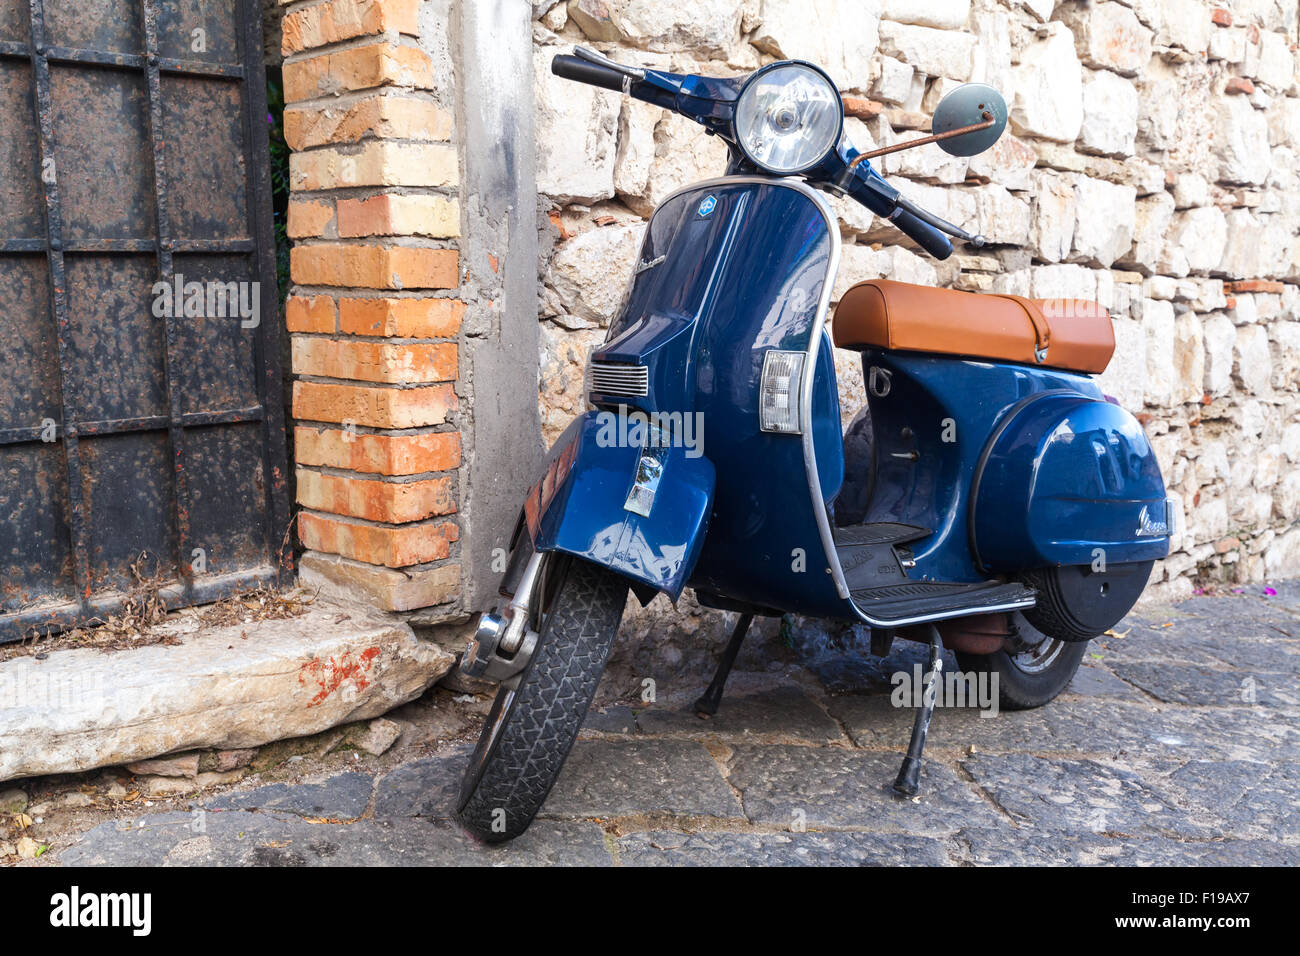 Gaeta, Italy - August 19, 2015: Classic blue Vespa PX 150 scooter stands parked in Italian town Stock Photo